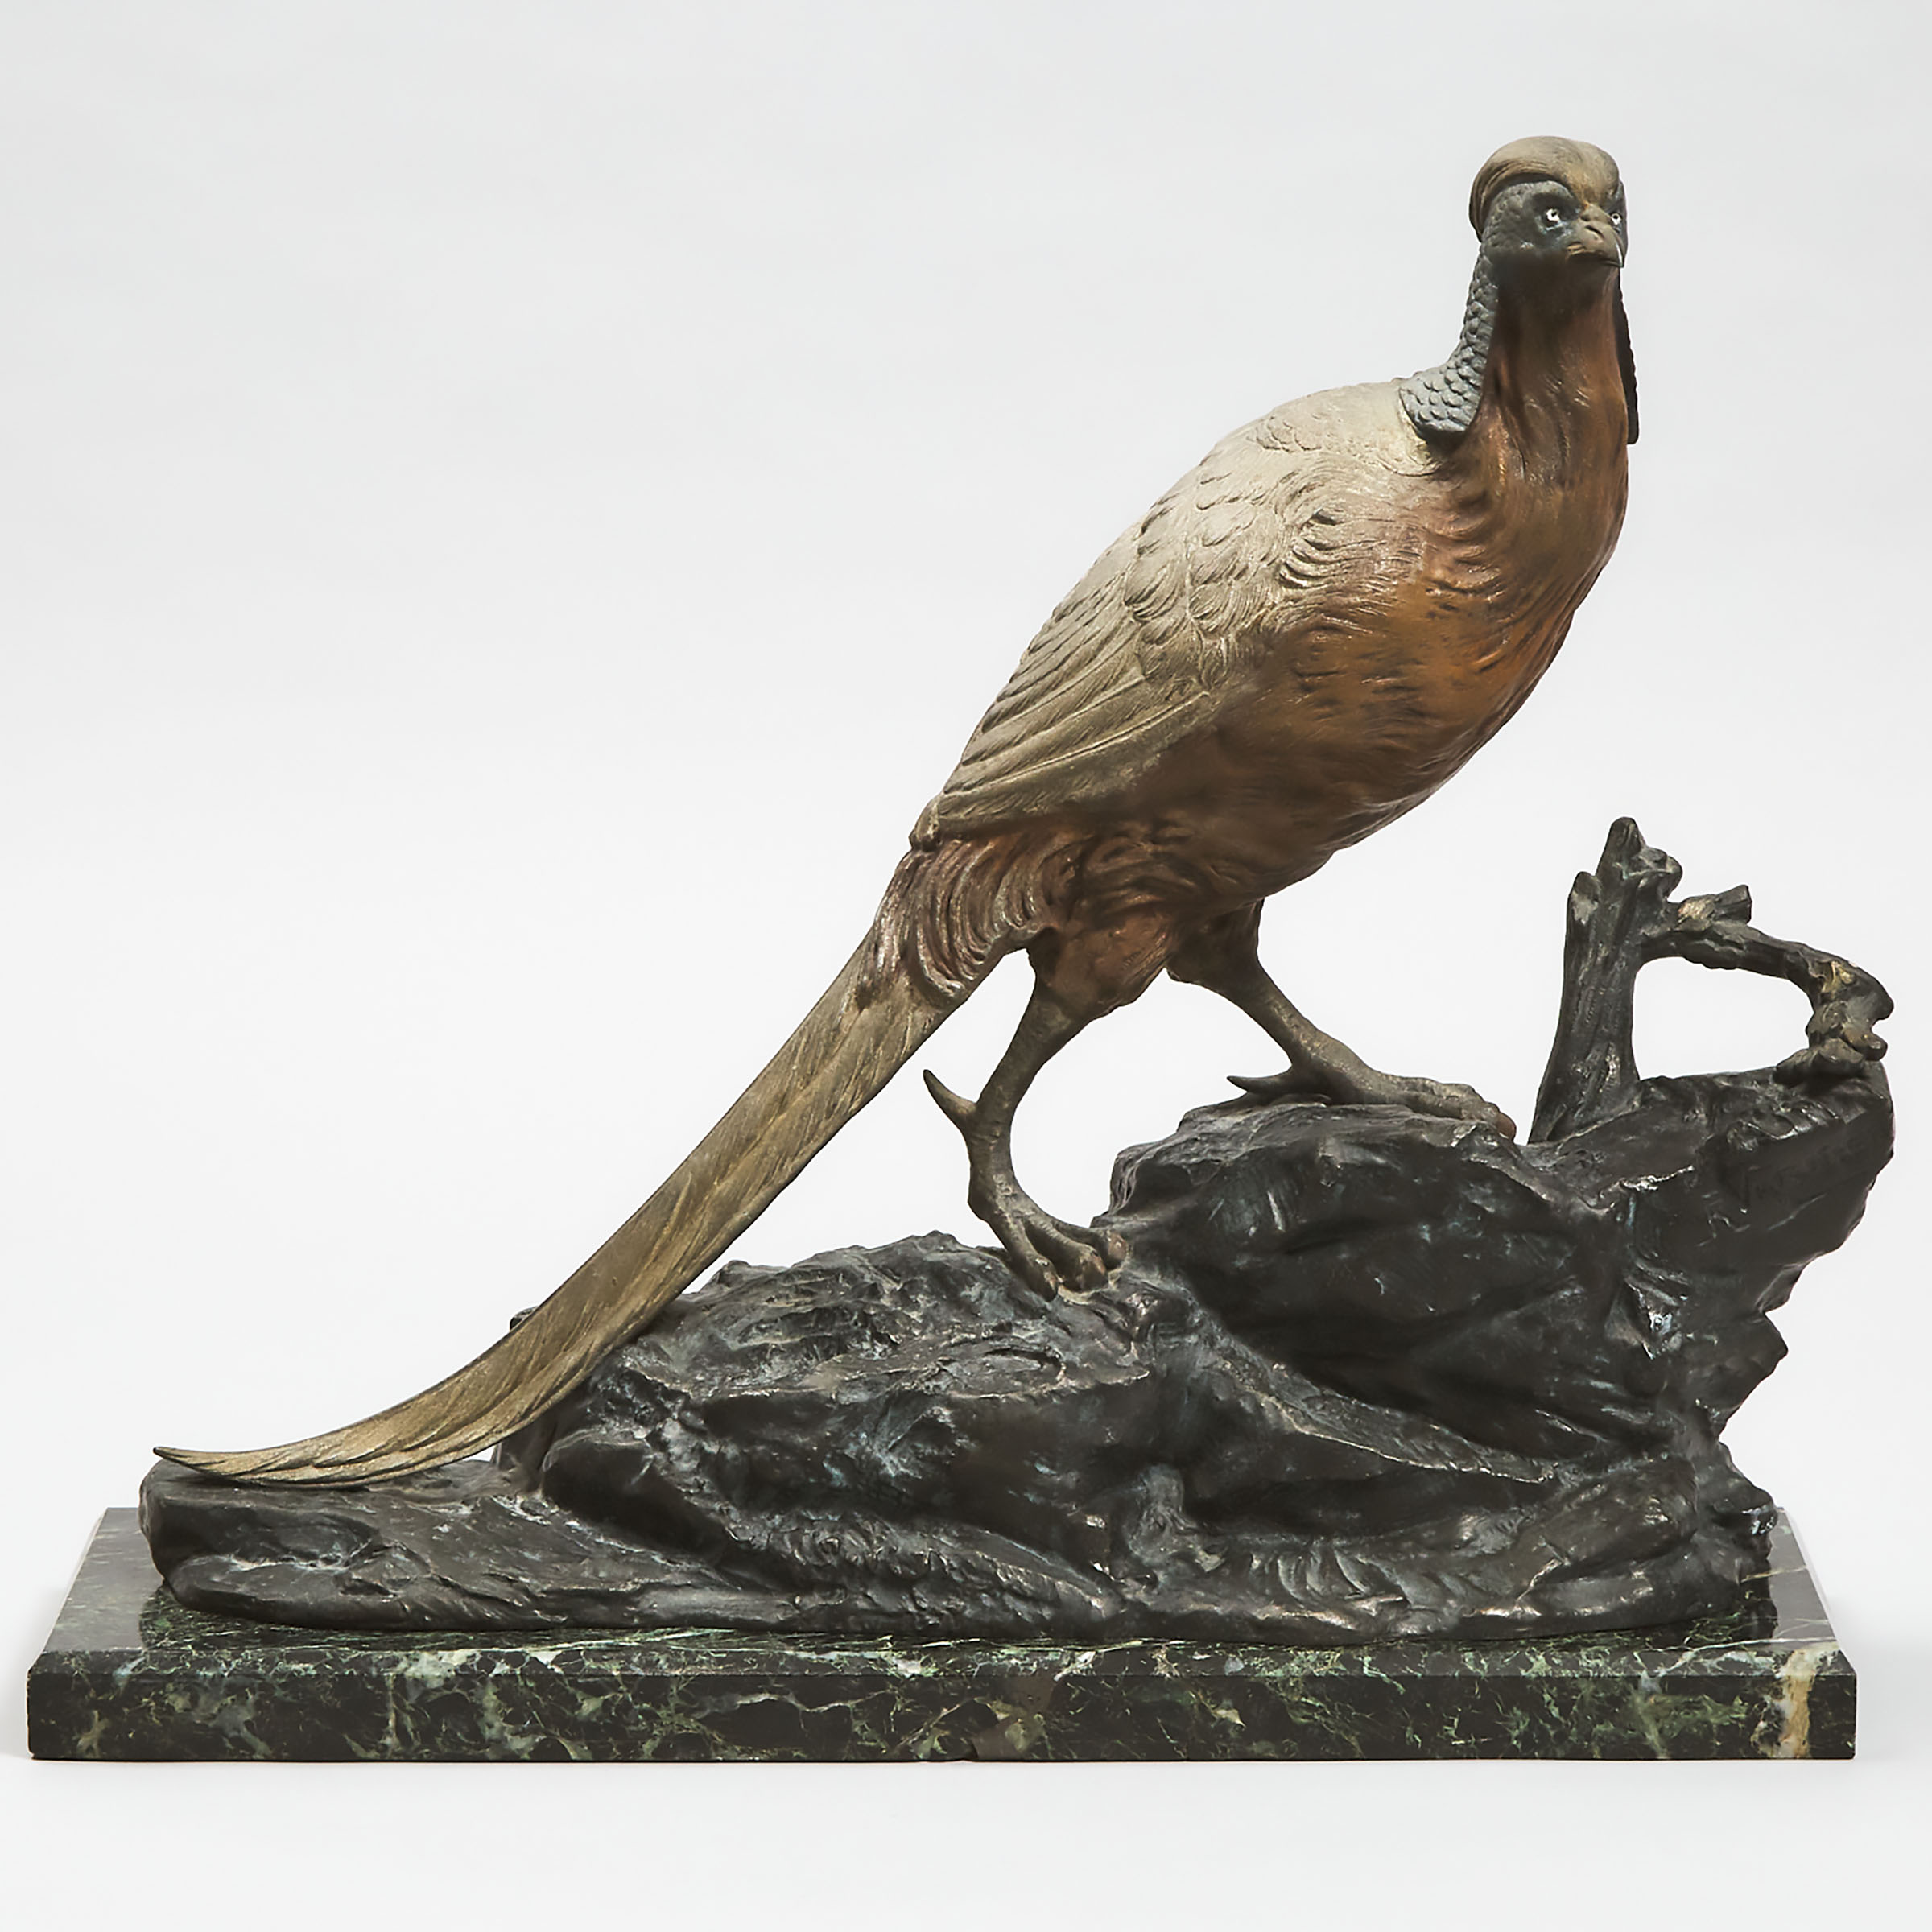 Cold Painted White Metal Model of a Golden Pheasant, c.1900